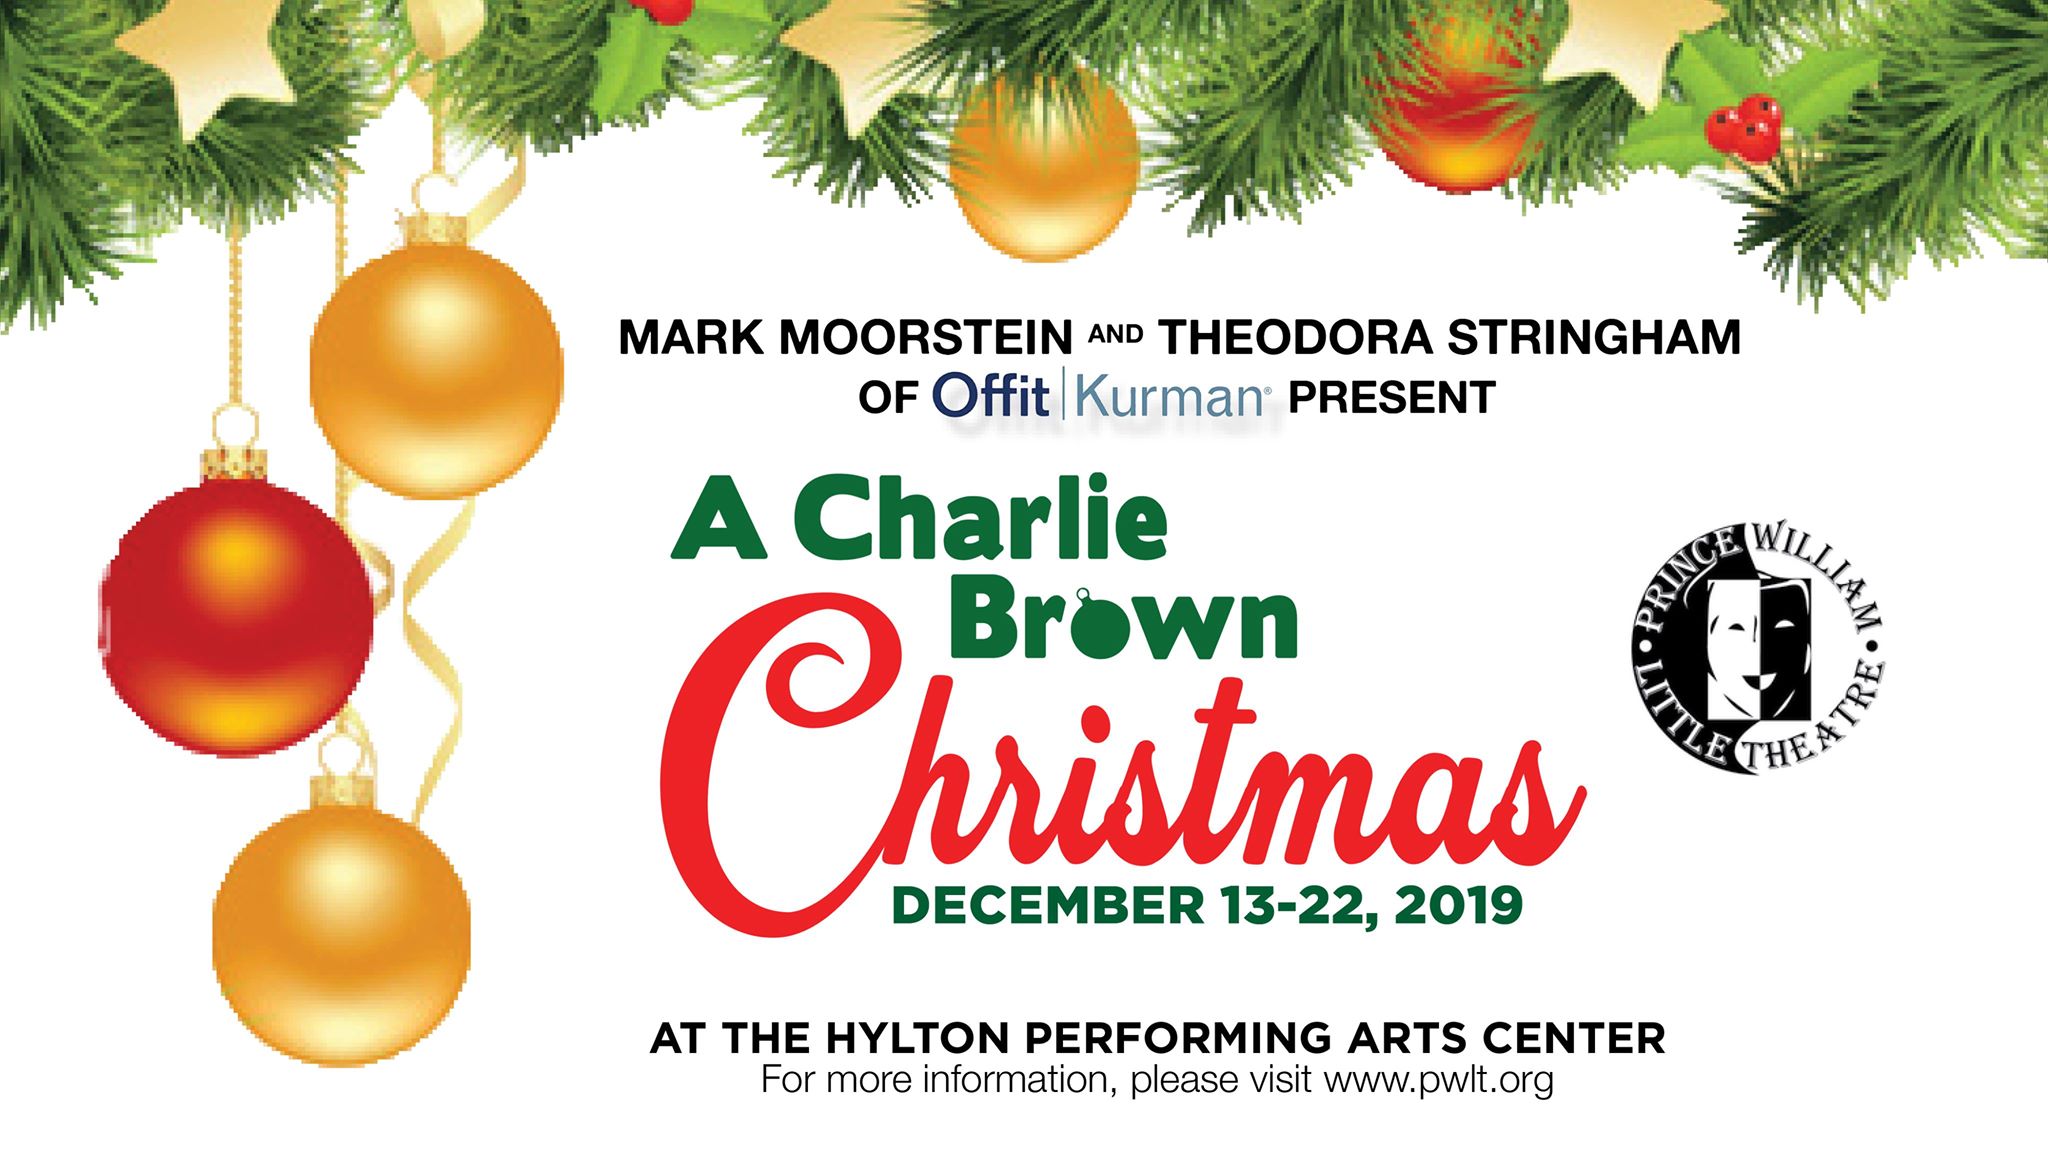 A Charlie Brown Christmas December 13-22 at the Hylton Performing Art Center